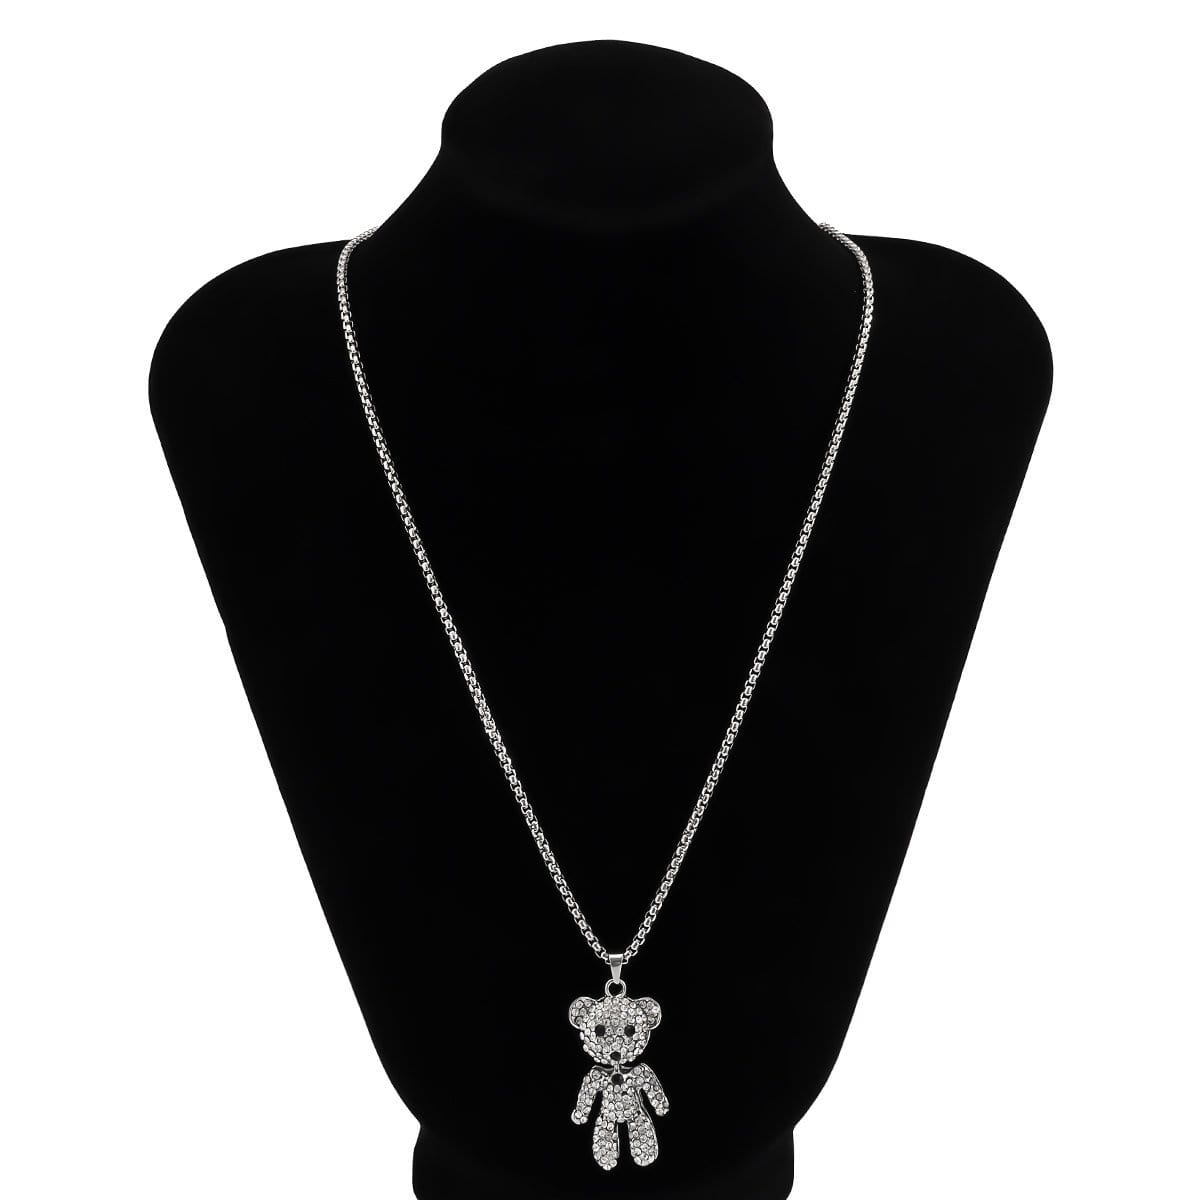 Stainless Steel Iced Out Teddy Bear Pendant Sweater Chain Necklace